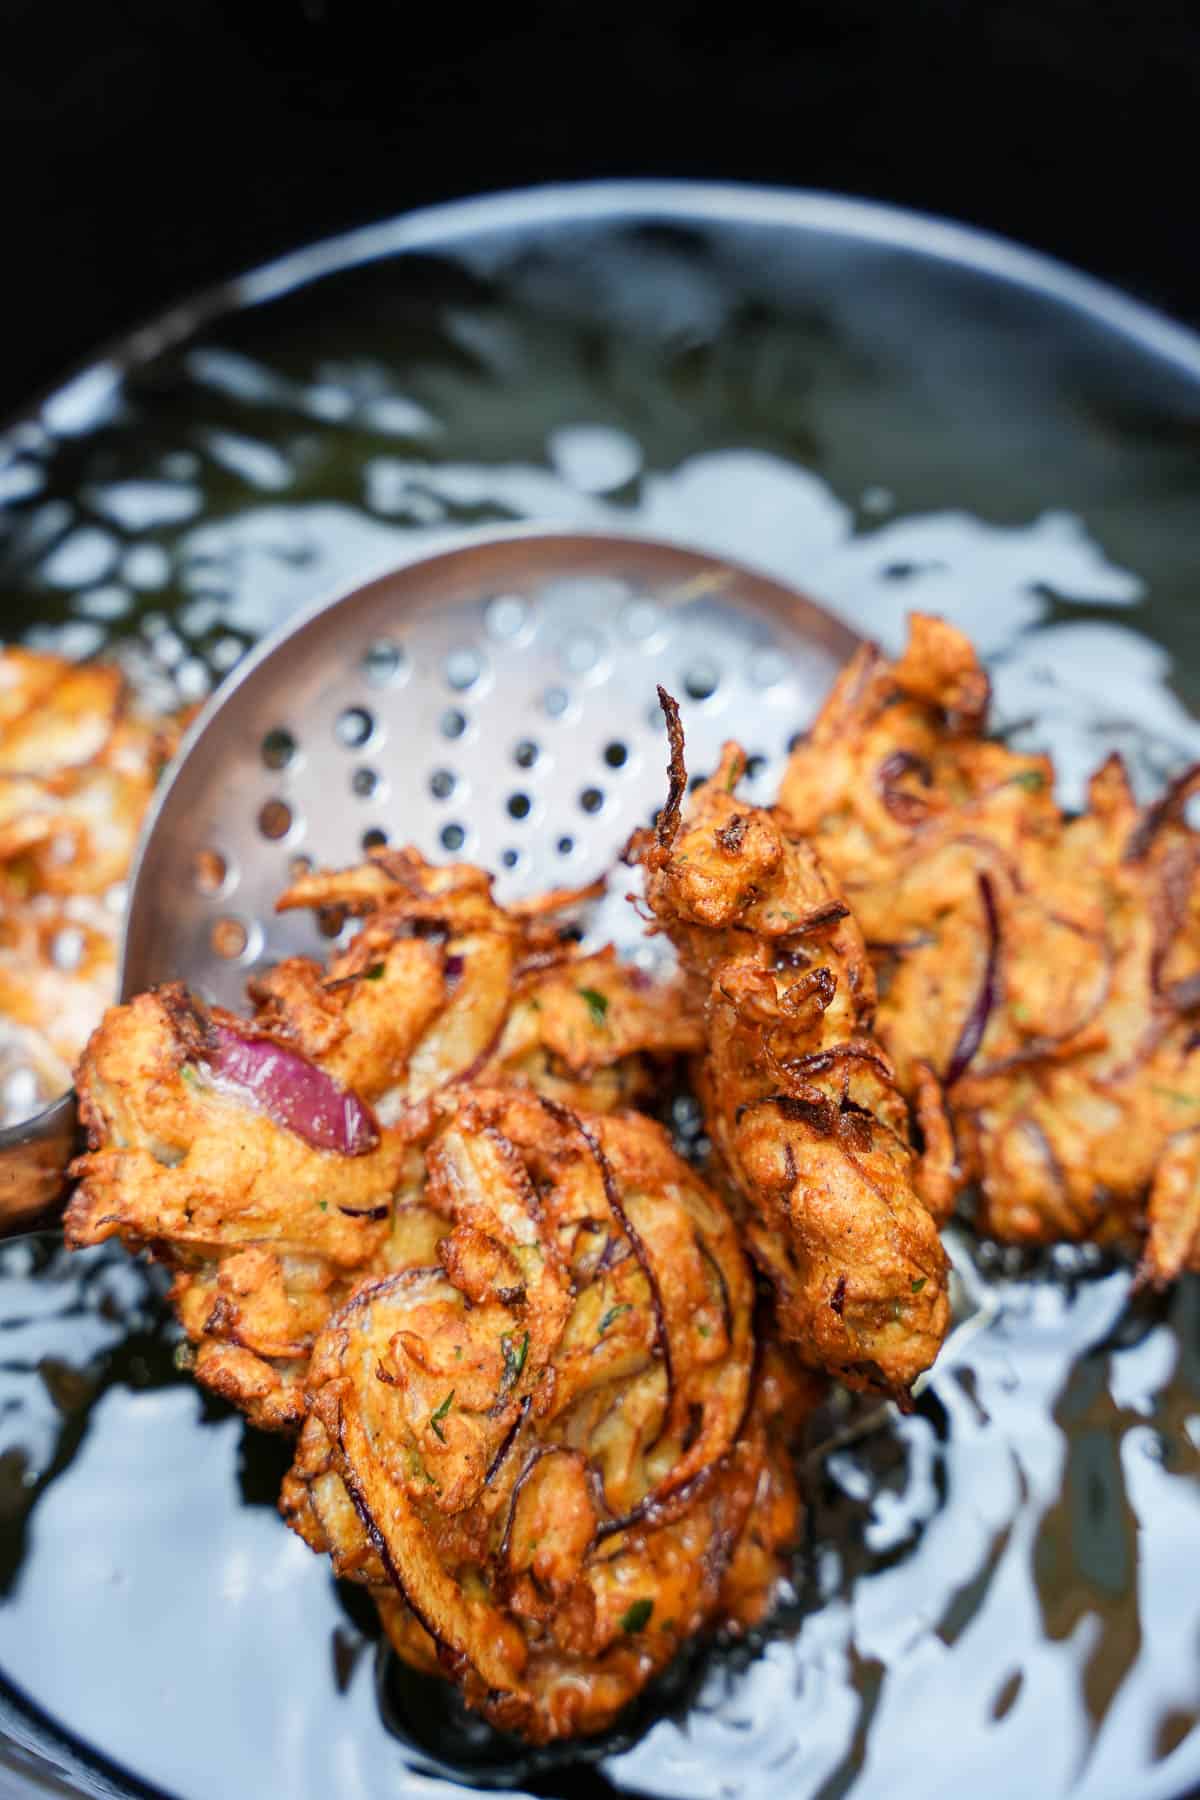 Crisp lightly golden brown bhaji are removed from the hot oil with a metal spider.